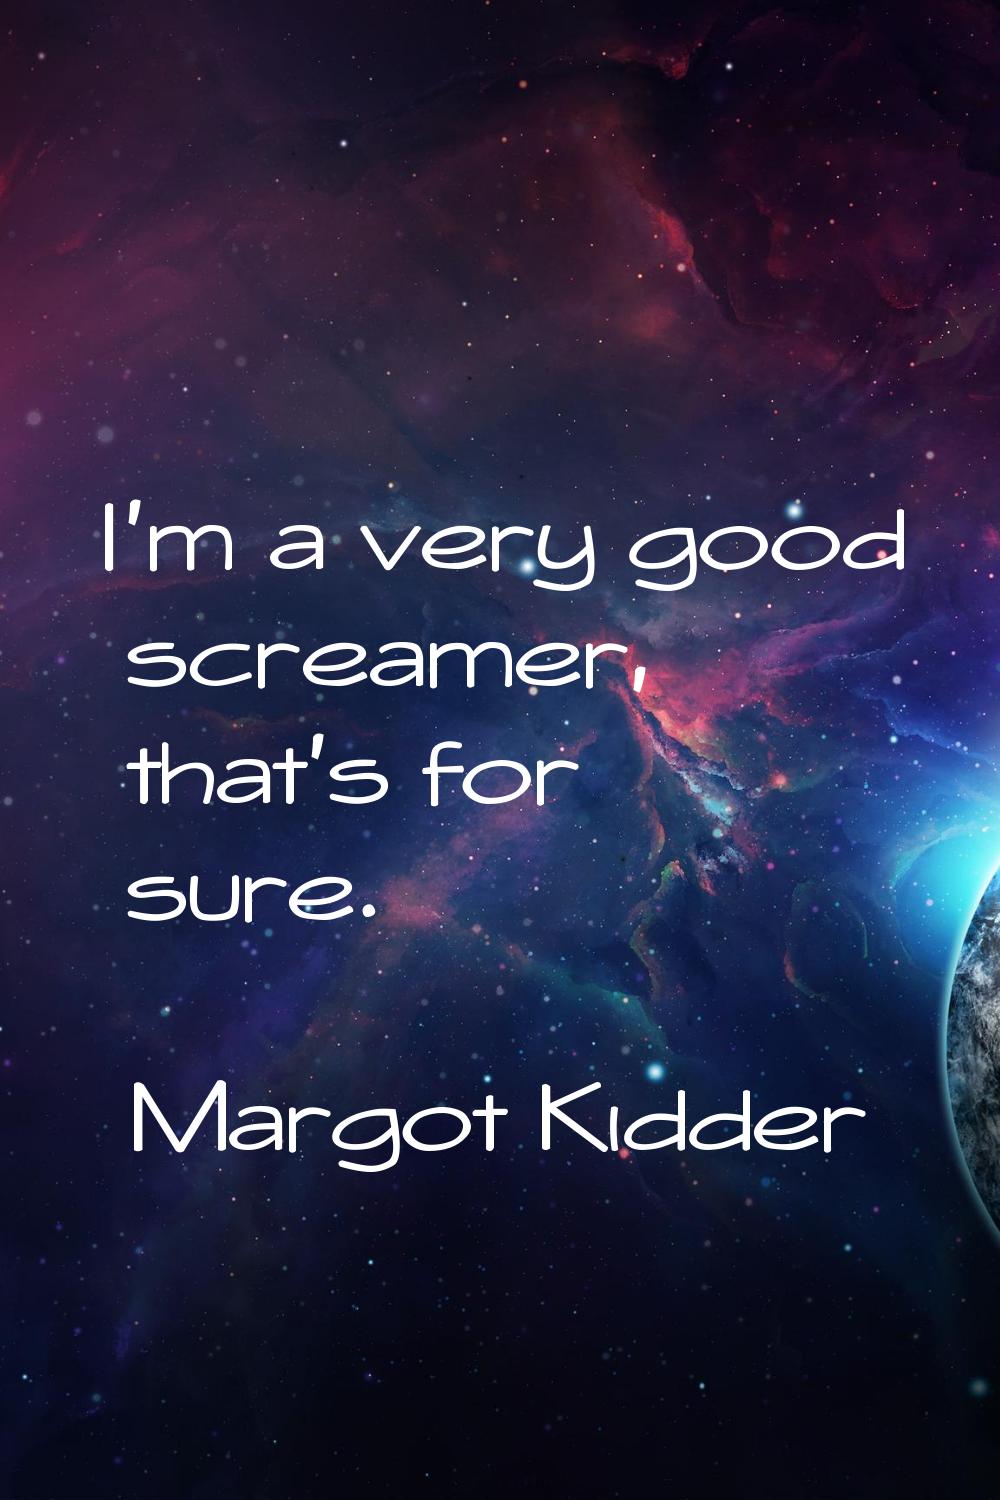 I'm a very good screamer, that's for sure.